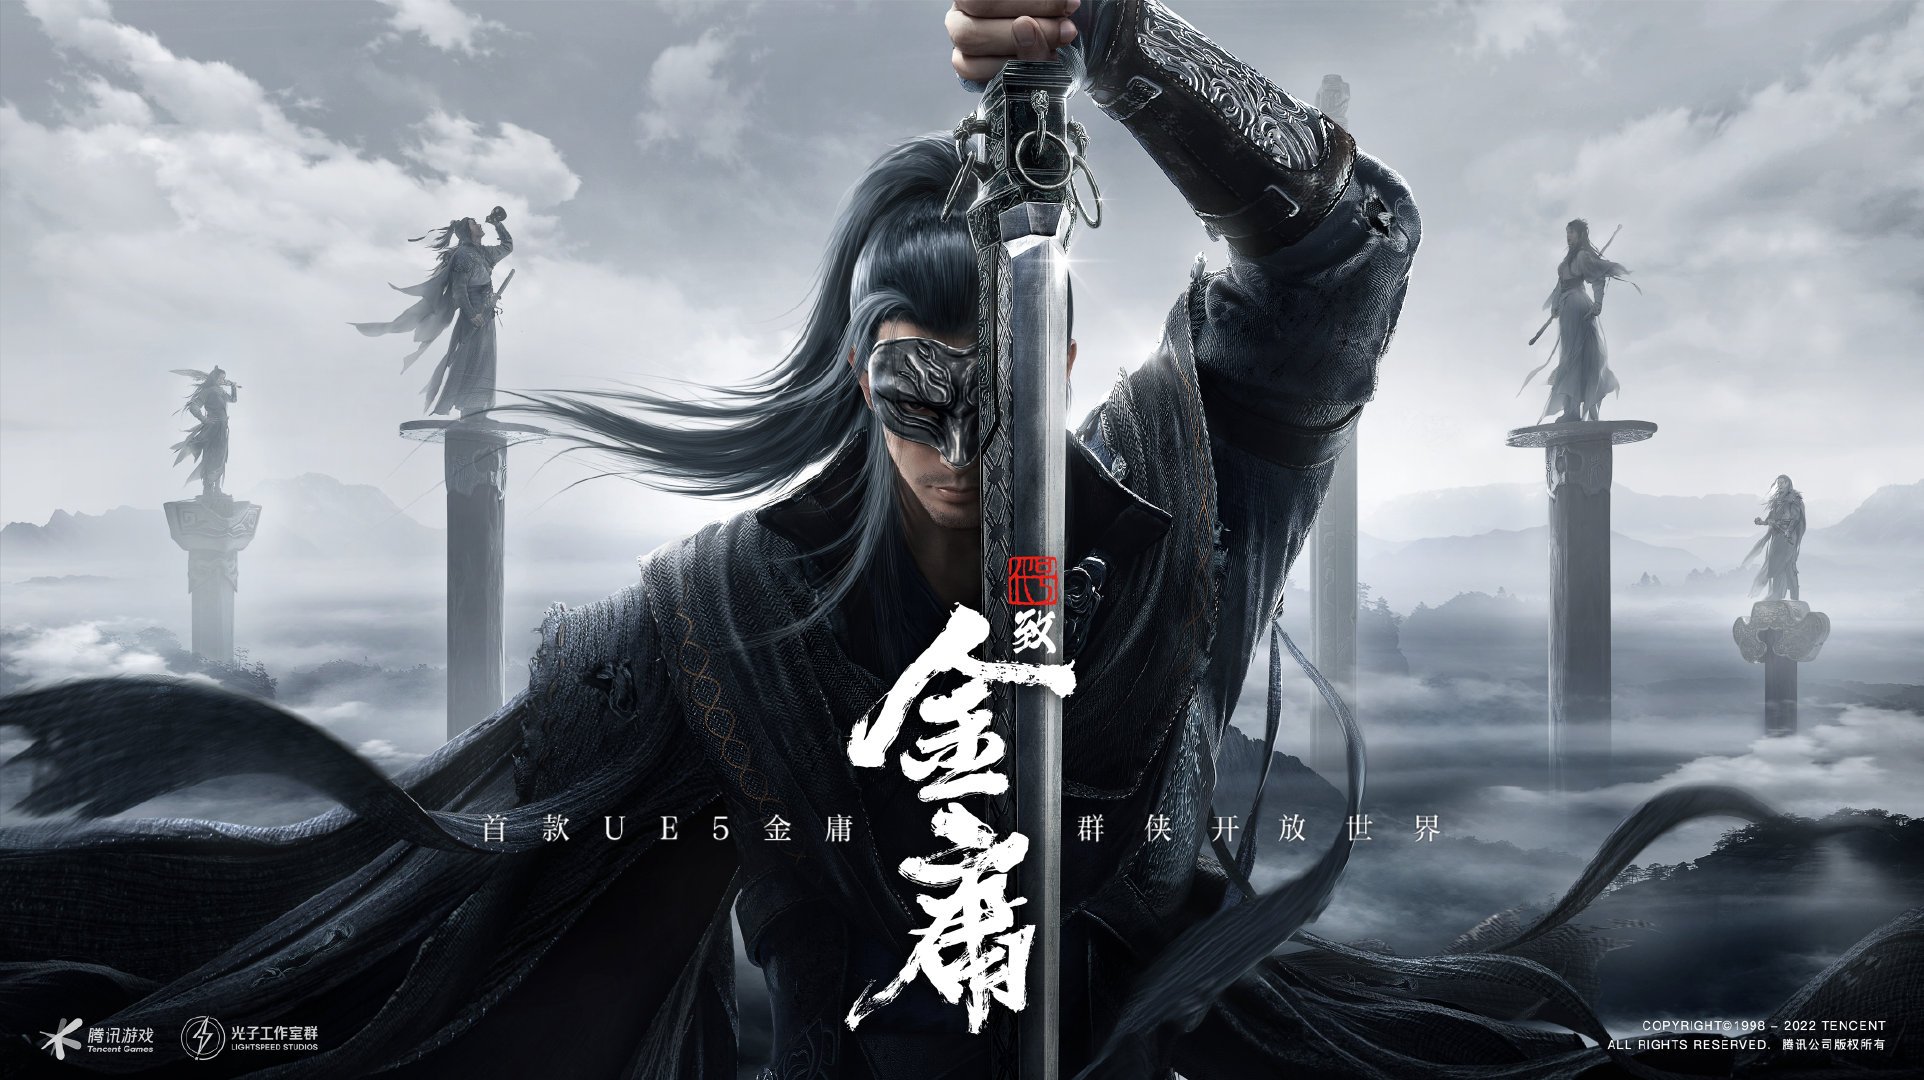 #
      Lightspeed Studios announces Wuxia-style open-world action game Code: To Jin Yong